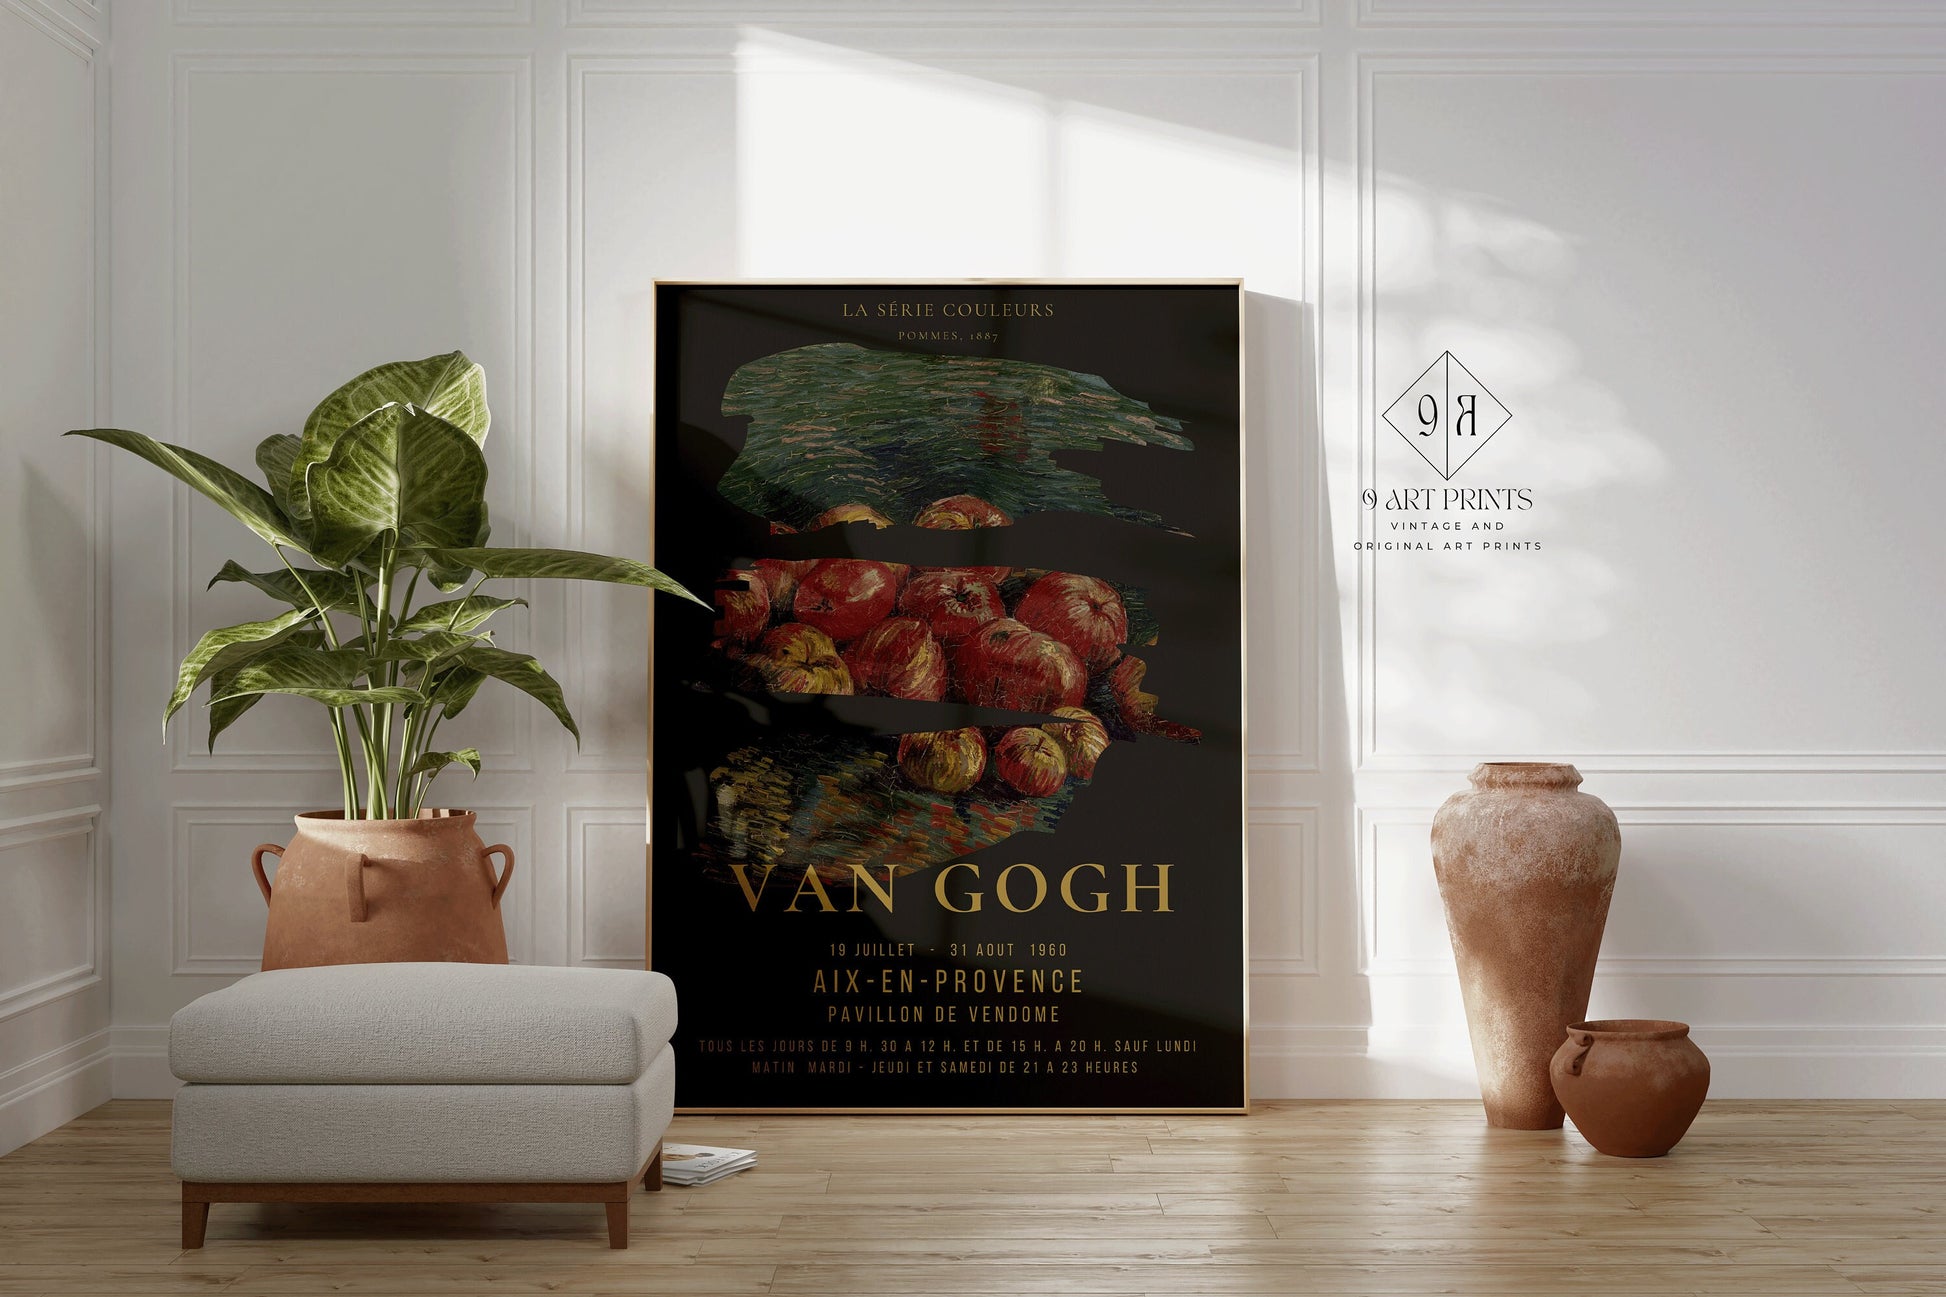 Van Gogh Colour Series Apples Exhibition Museum Poster Fine Art Painting Vintage Famous Ready to hang Framed Home Office Decor Gift Idea